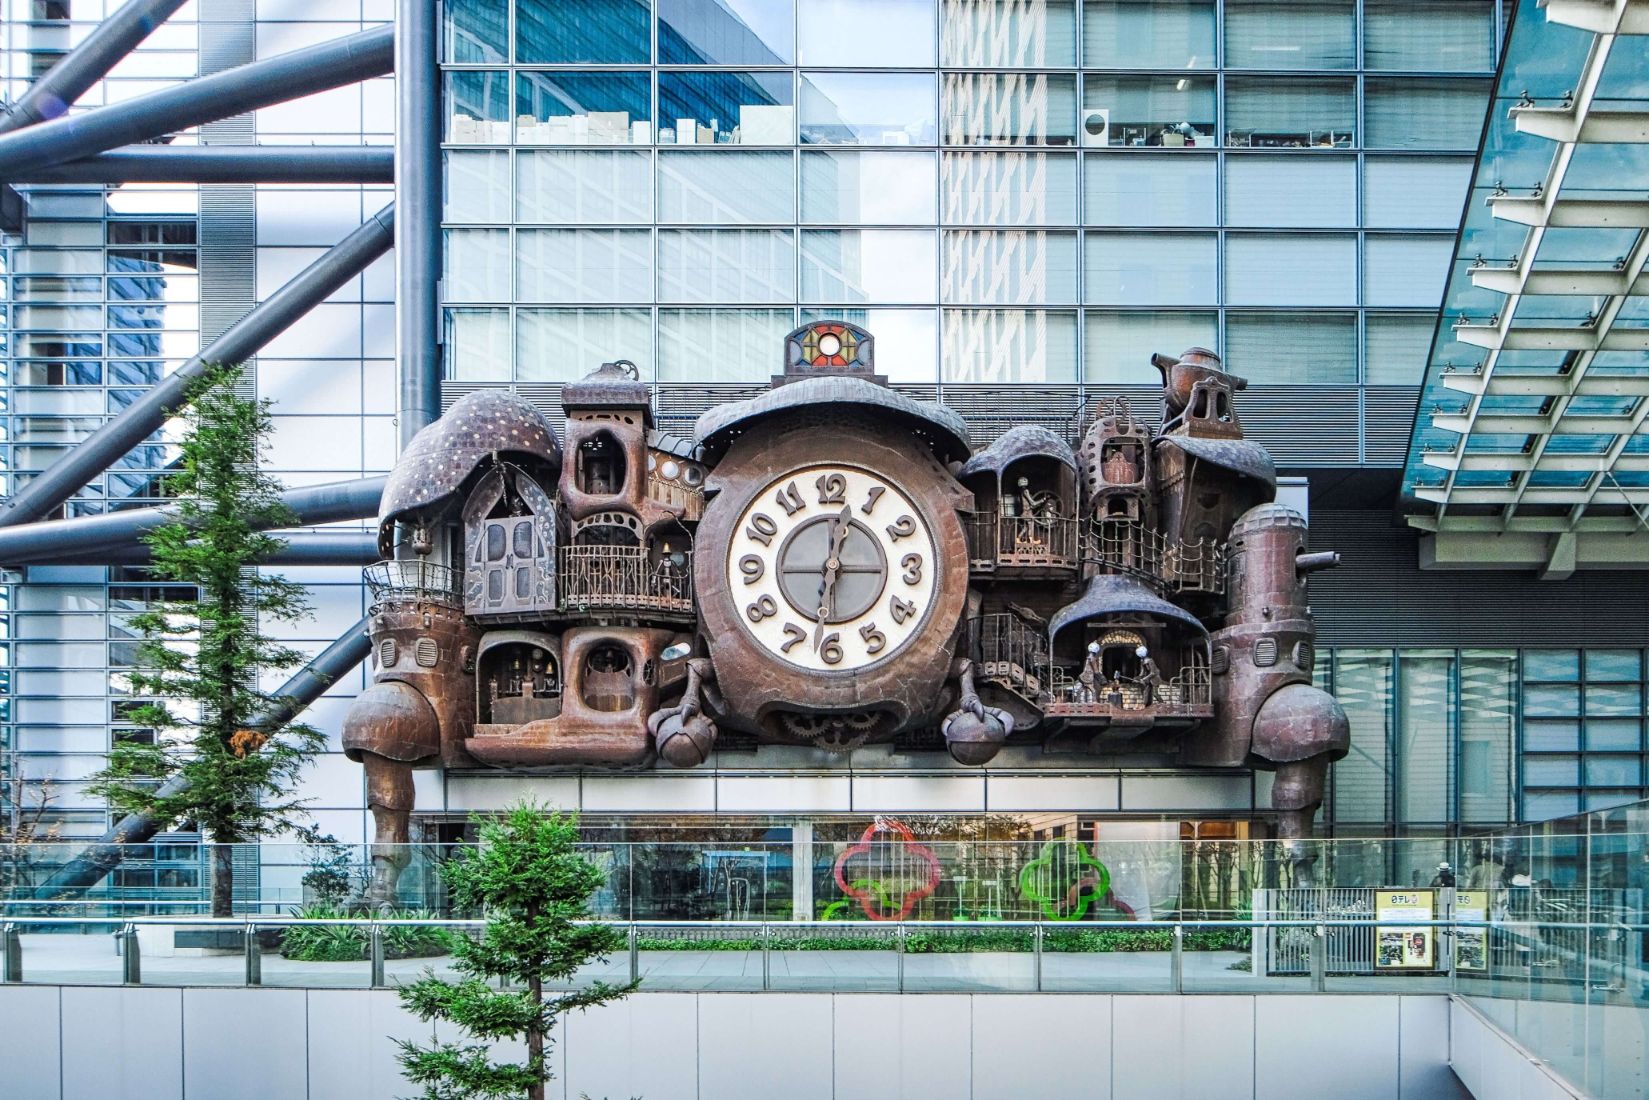 The Giant Ghibli Clock in Tokyo guide book for photography in tokyo